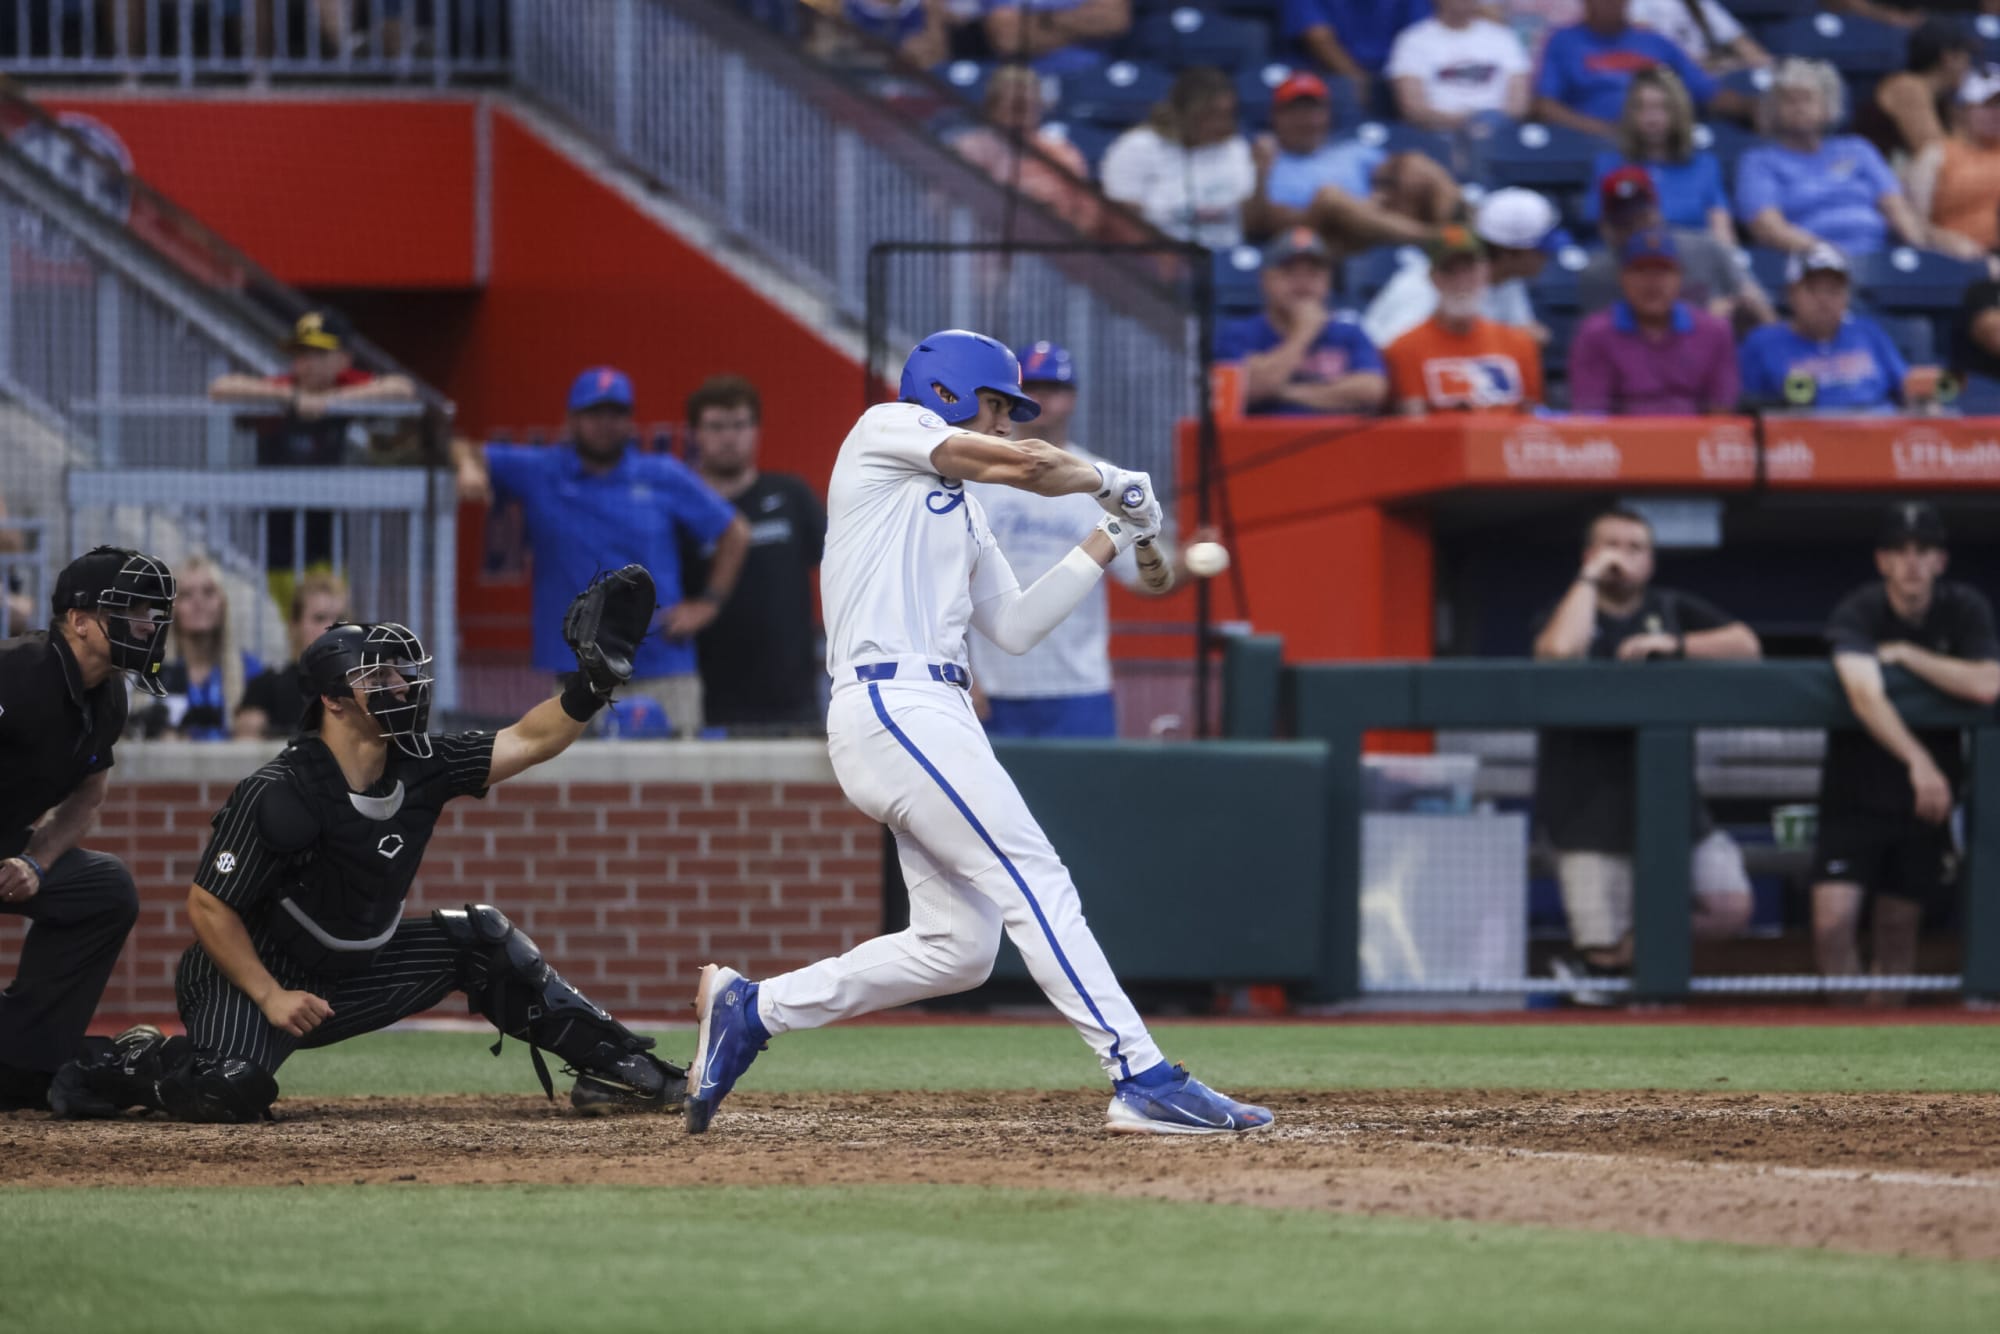 SEC Baseball Trio Named As All Three Golden Spikes Finalists